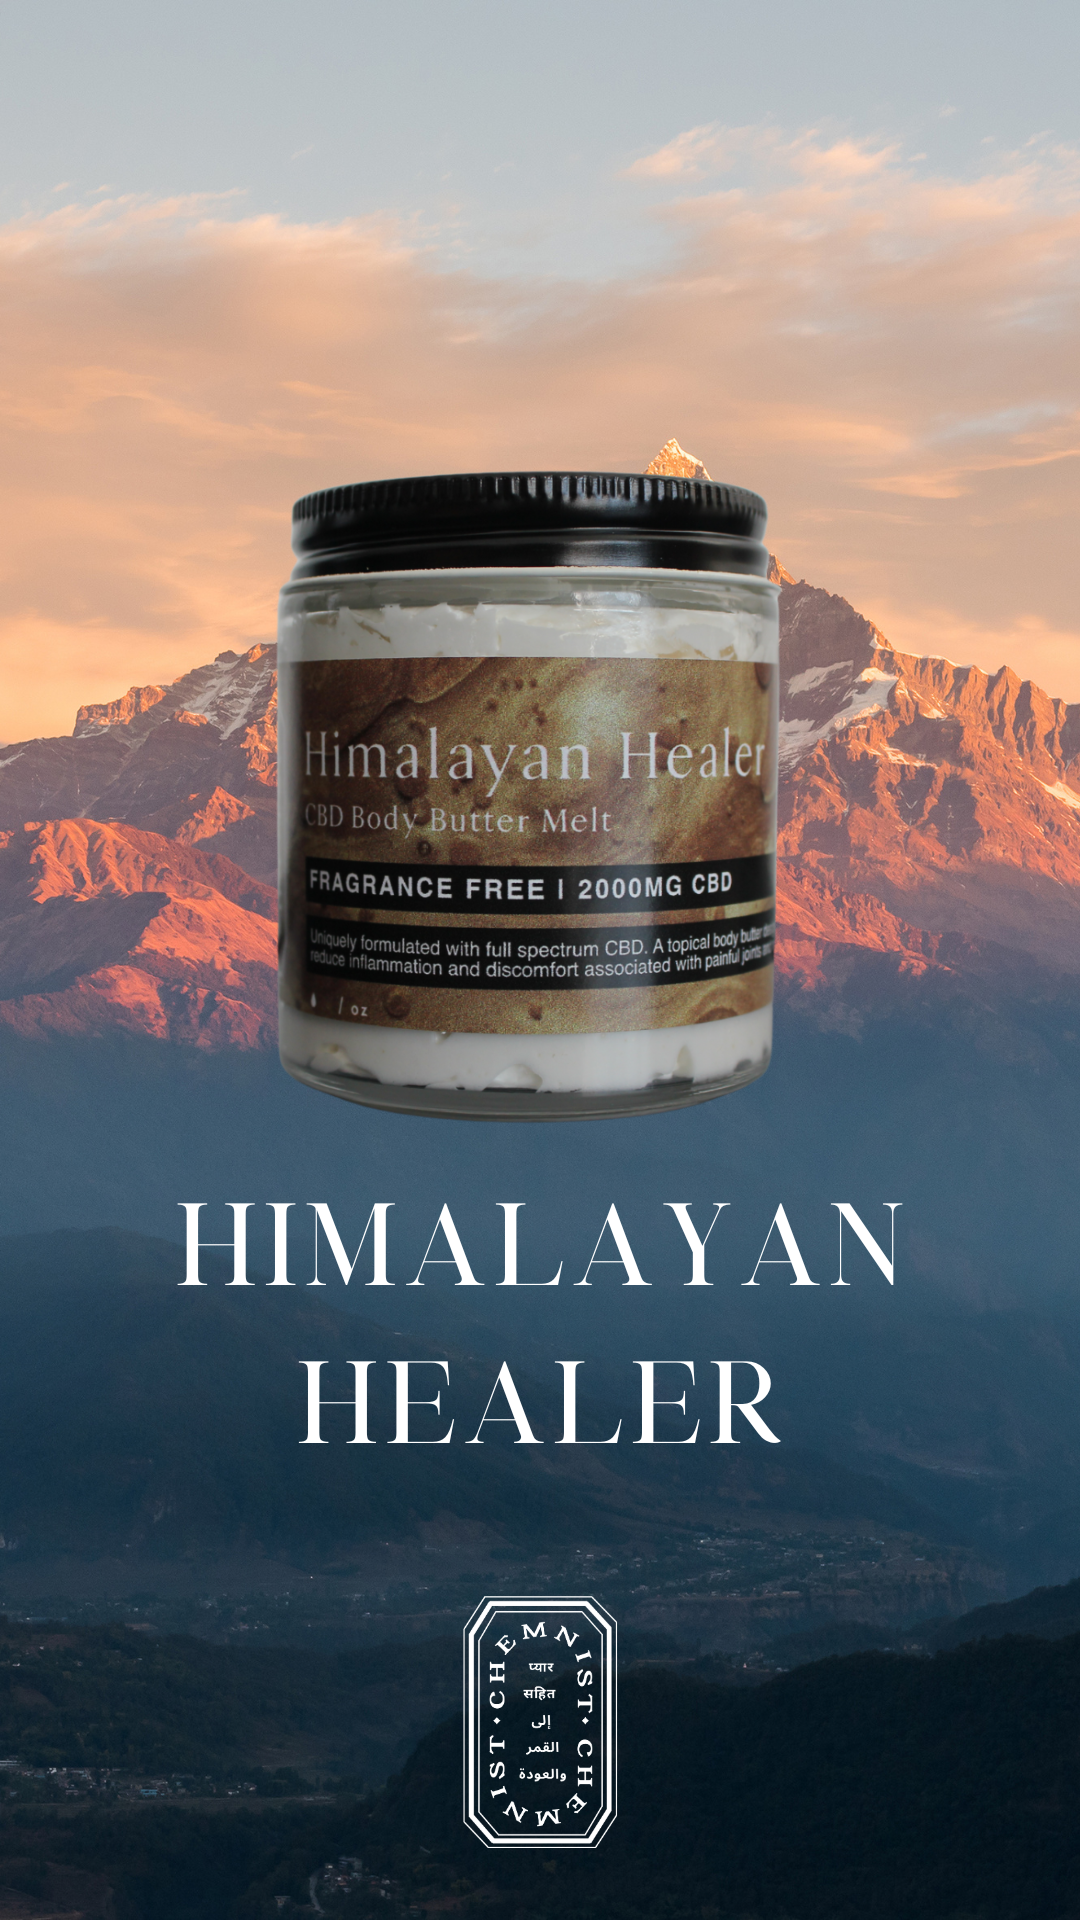 Himalayan Healer Body Butter Melt for Pain Relief